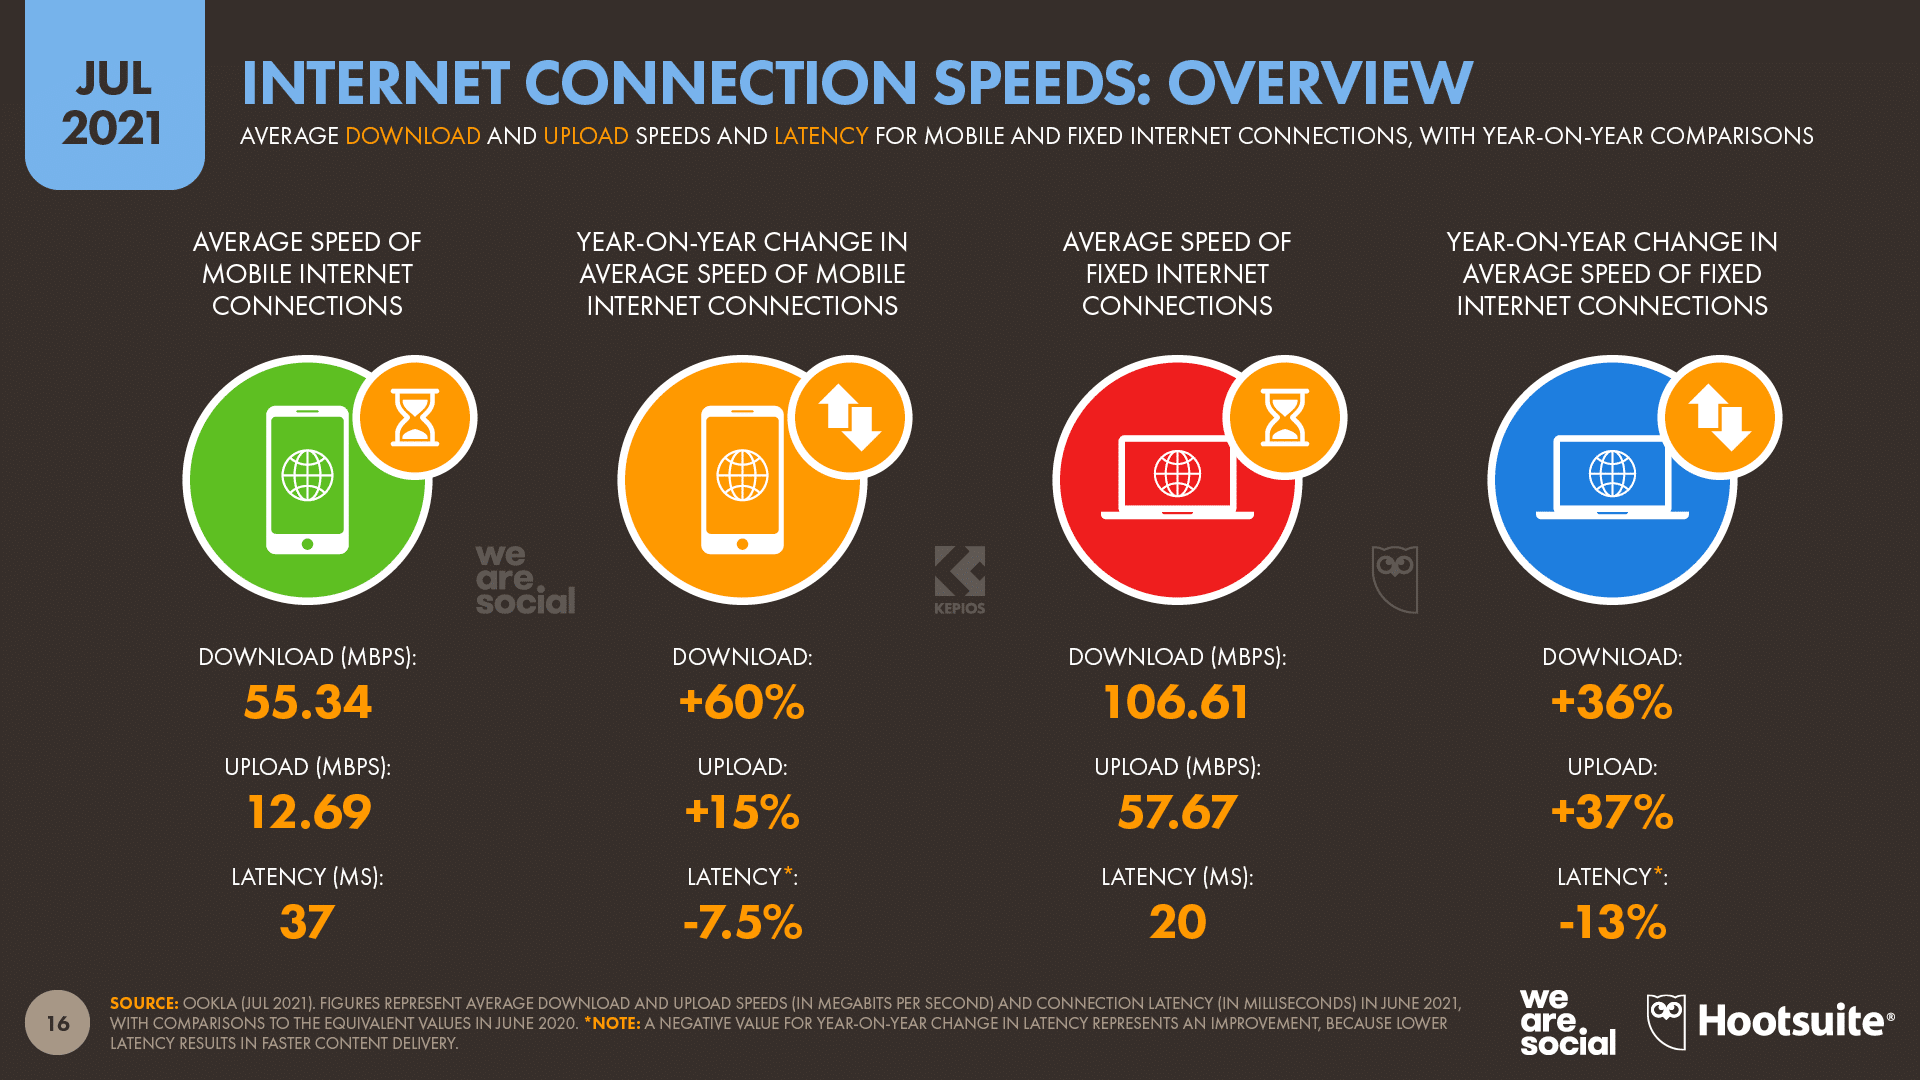 chart showing internet connection speeds overview as of July 2021